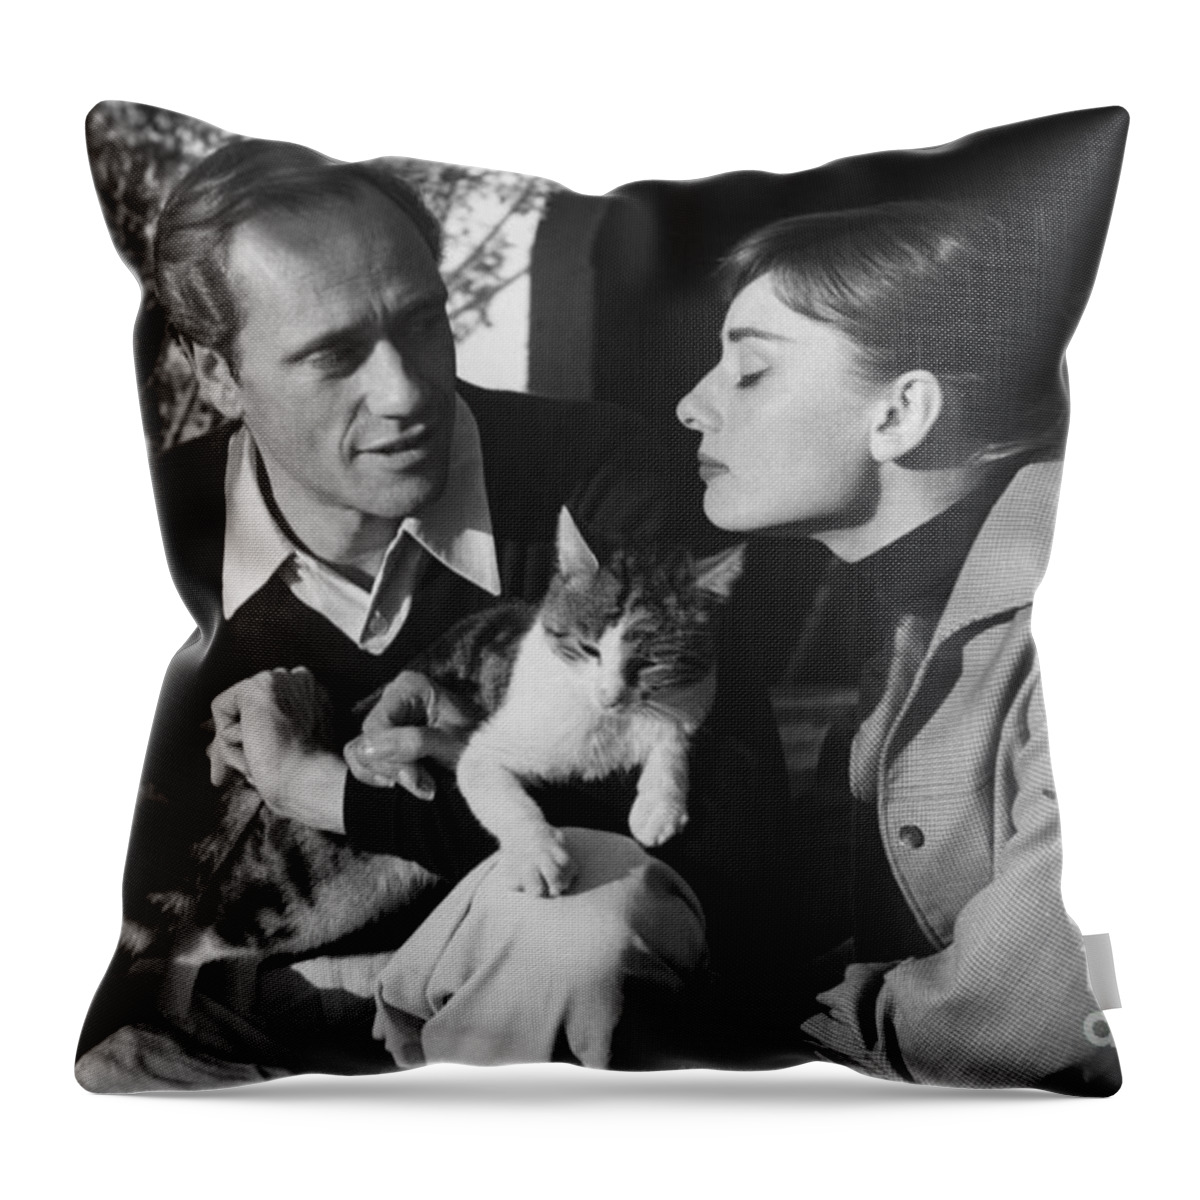 B&w Throw Pillow featuring the photograph Audrey Hepburn and Mel Ferrer by George Daniell